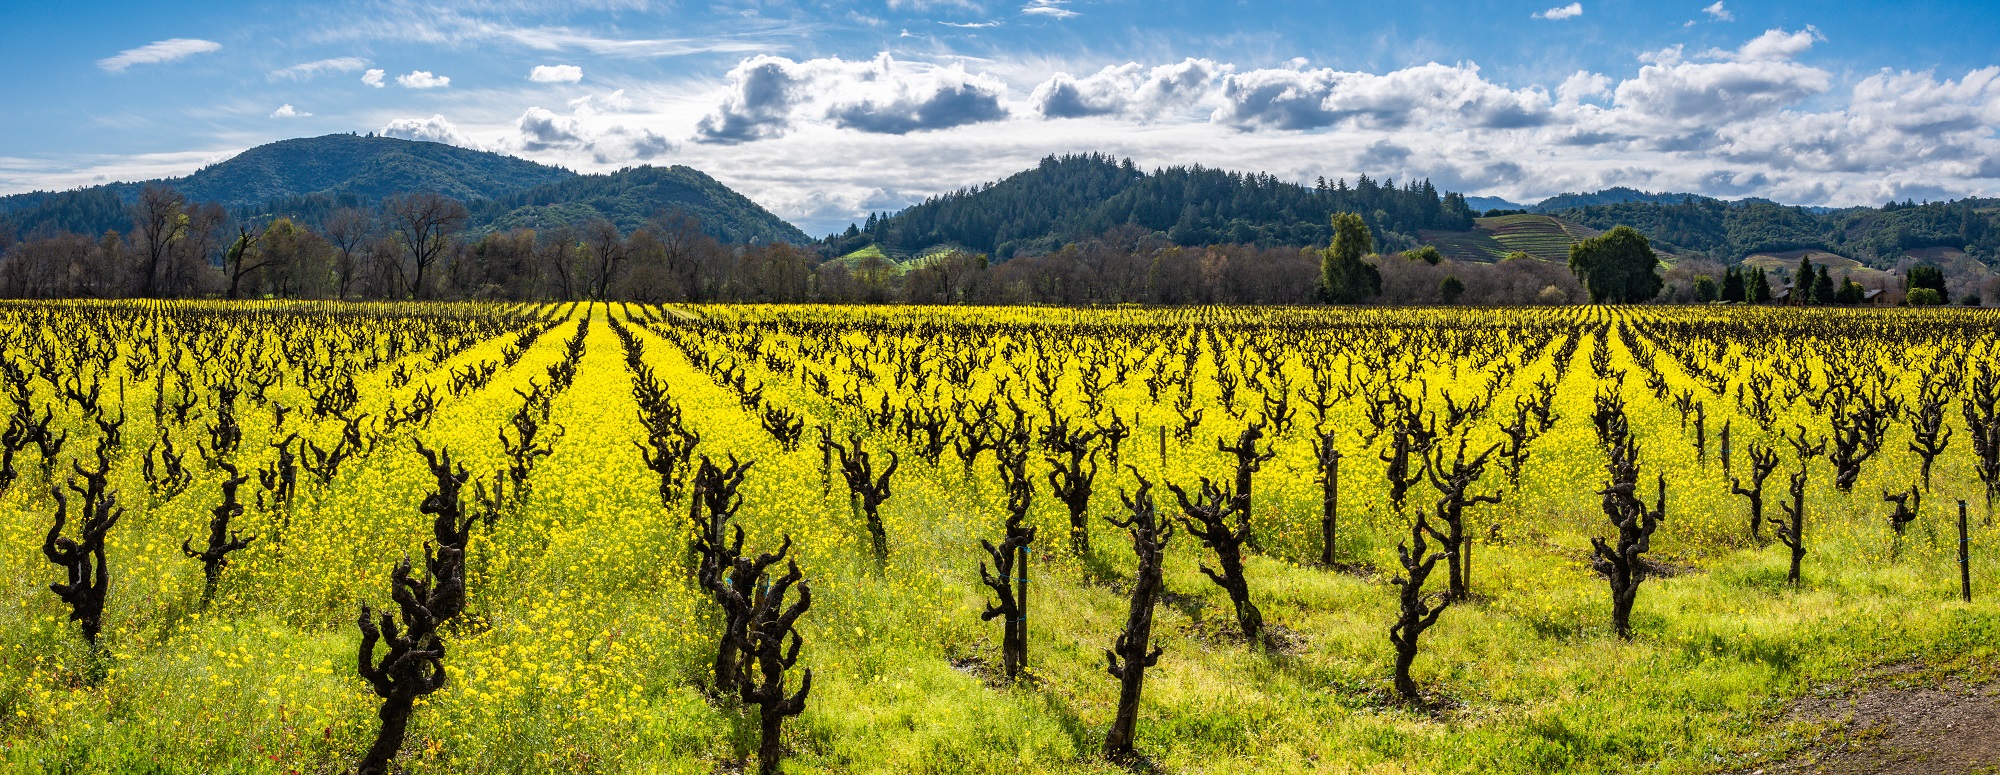 The rolling vineyards of Napa Valley